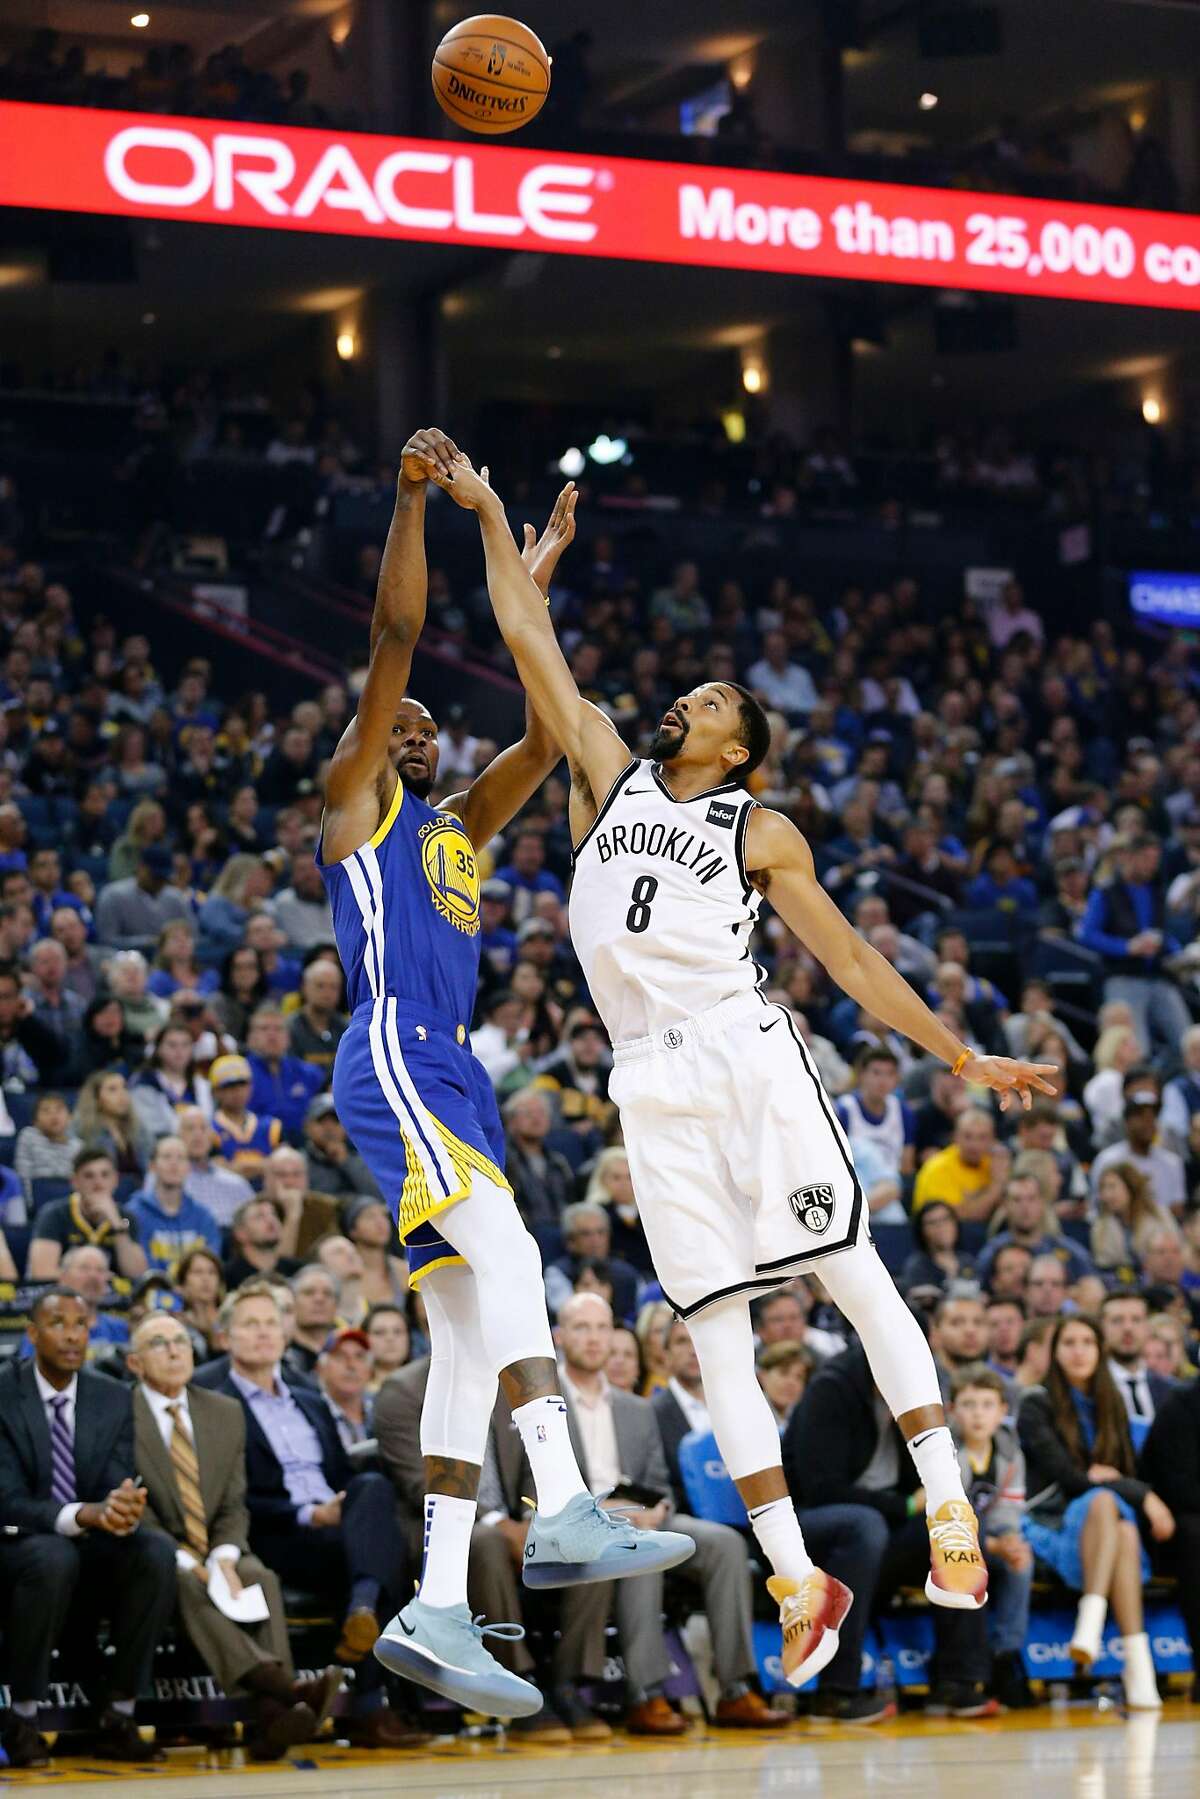 Golden State Warriors forward Kevin Durant (35) makes the shot against Brooklyn Nets guard Spencer Dinwiddie (8) in the second half of an NBA game at Oracle Arena on Saturday, Nov. 10, 2018, in Oakland, Calif. The Warriors won 116-100.